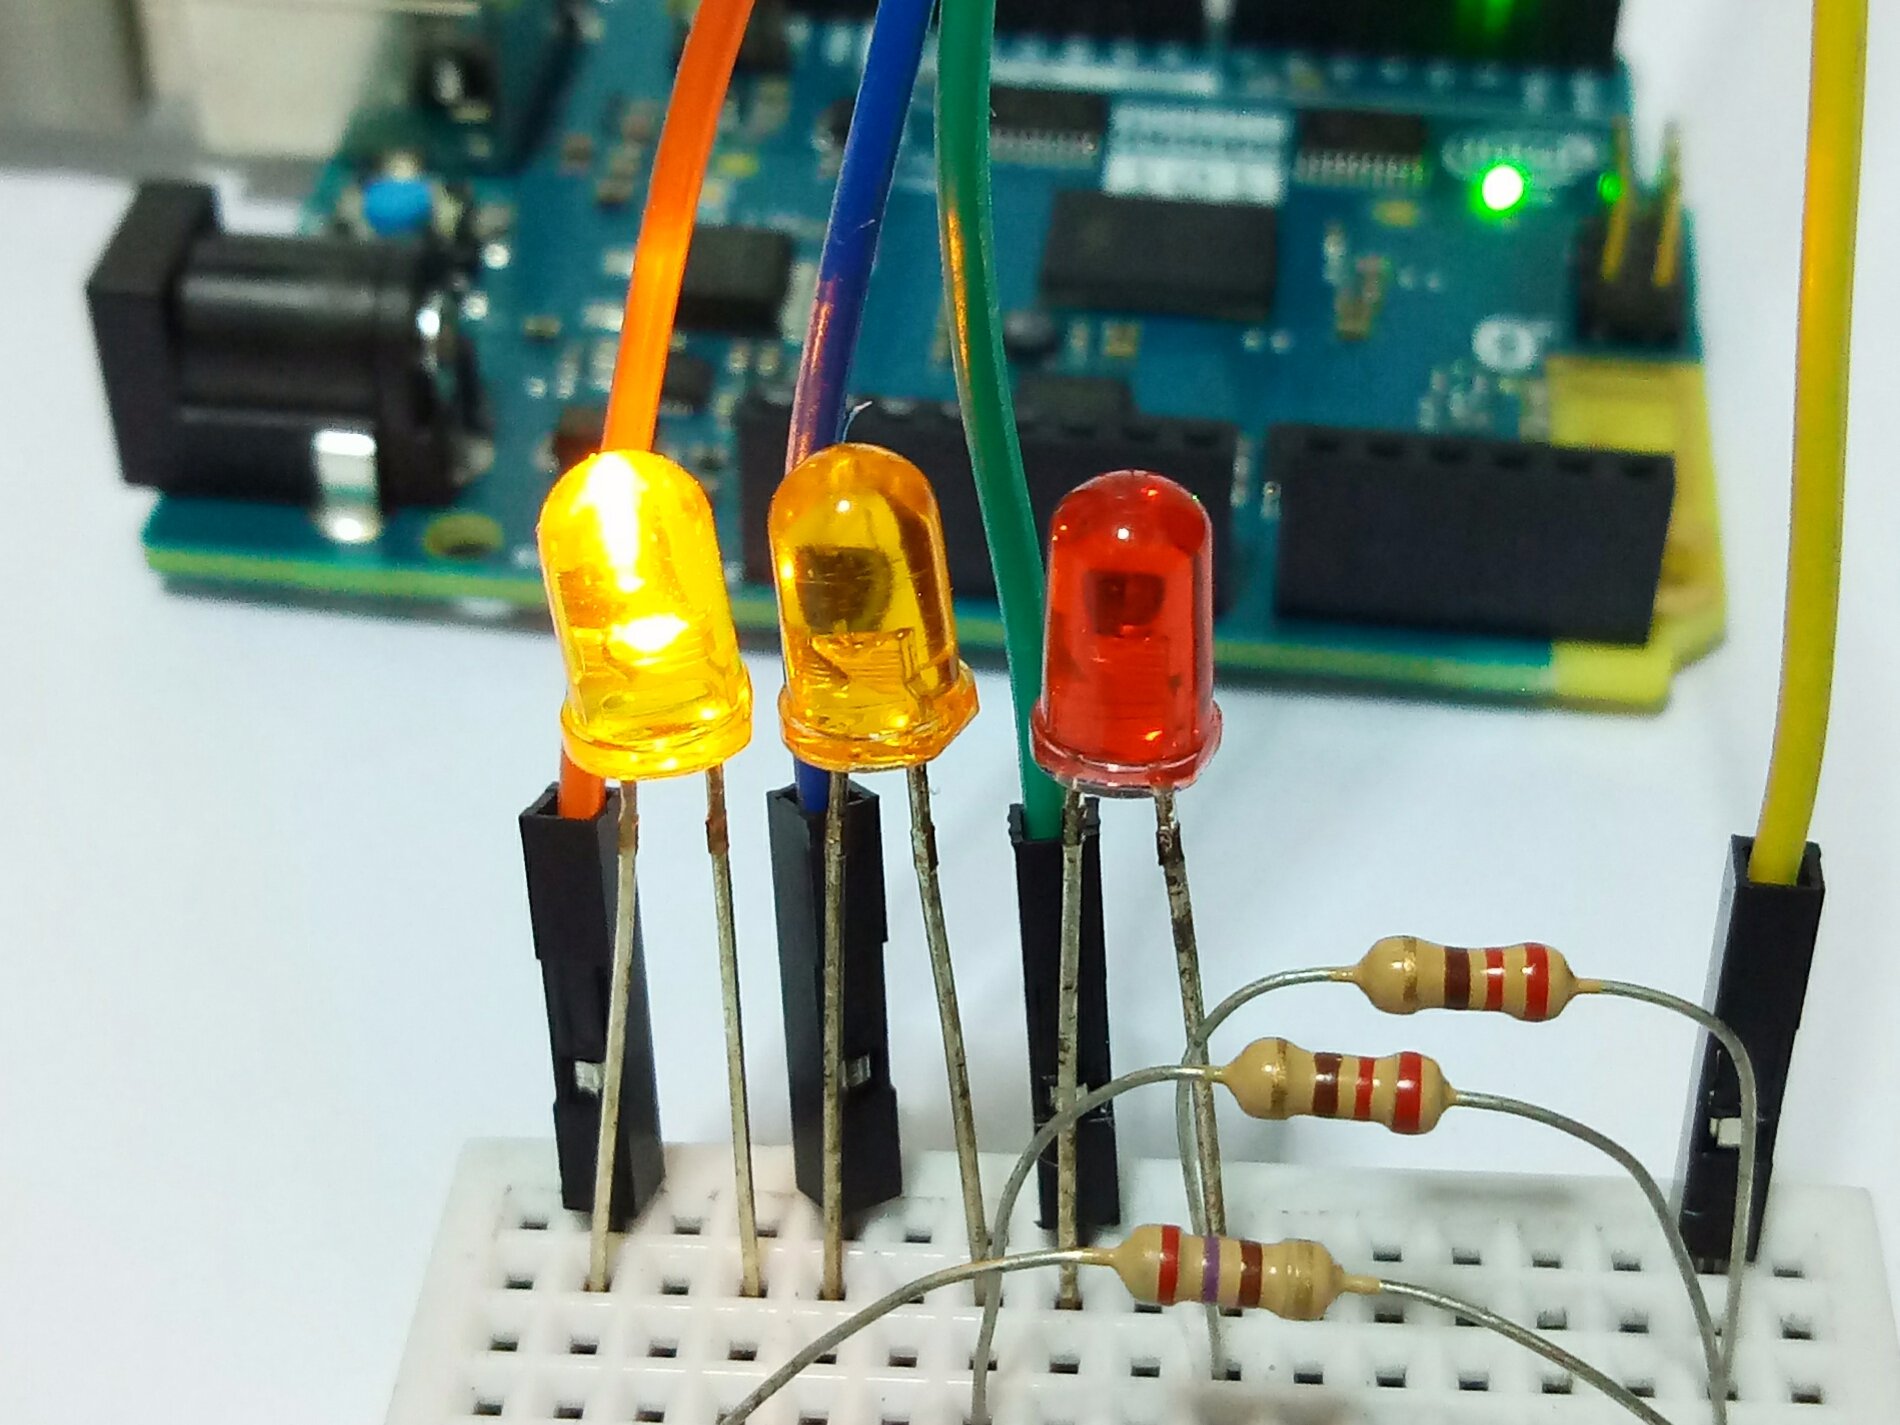 led project arduino